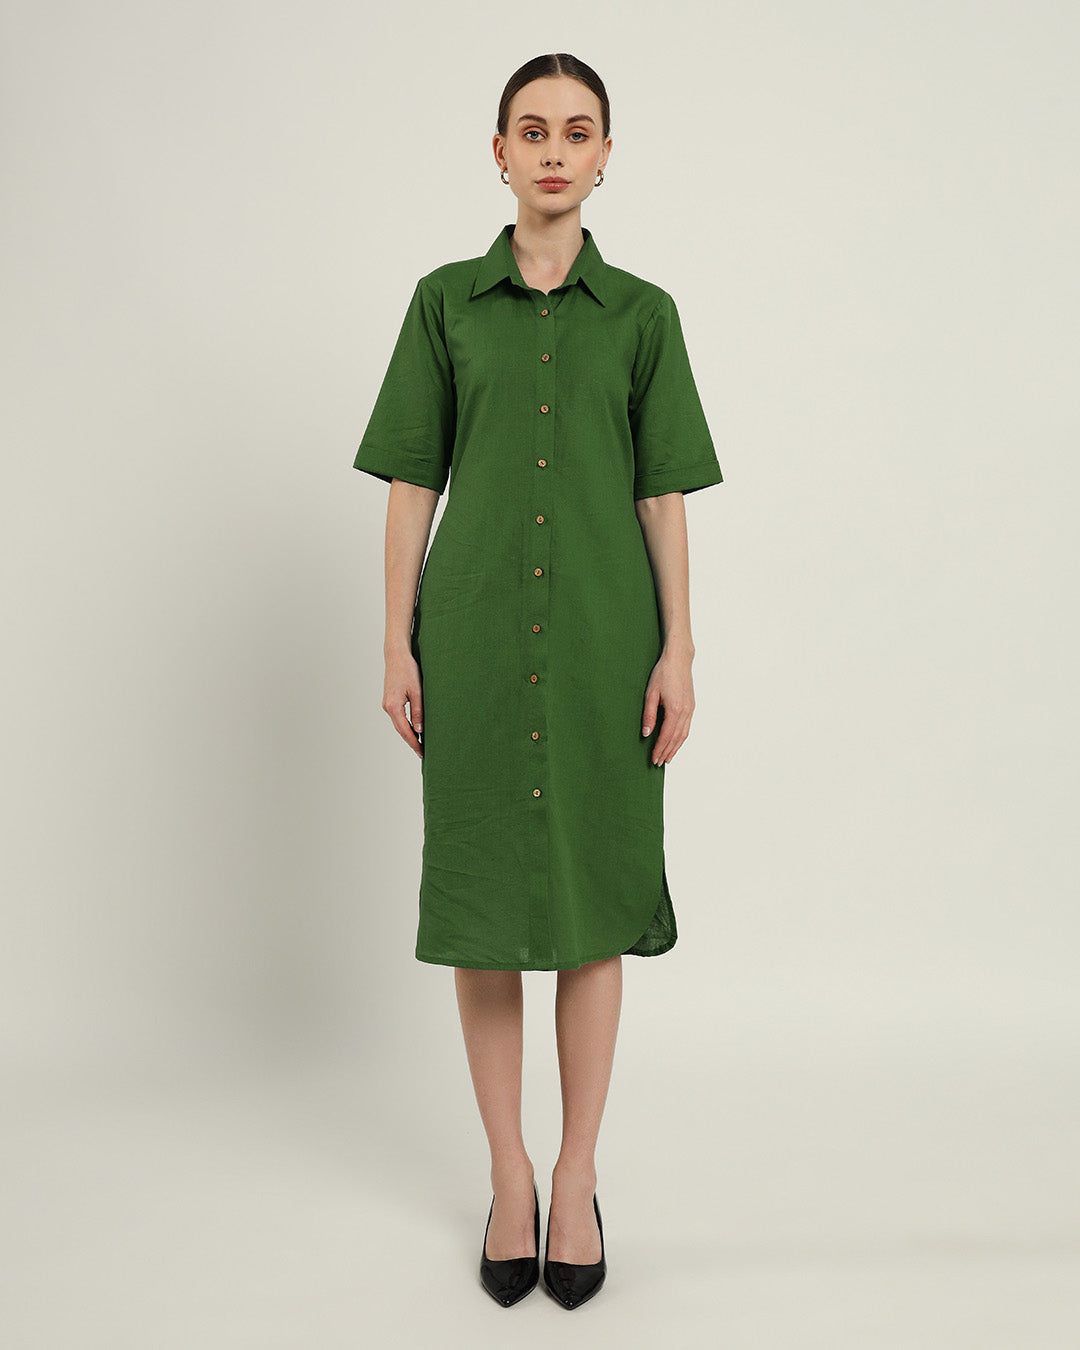 The Tampa Emerald Cotton Dress